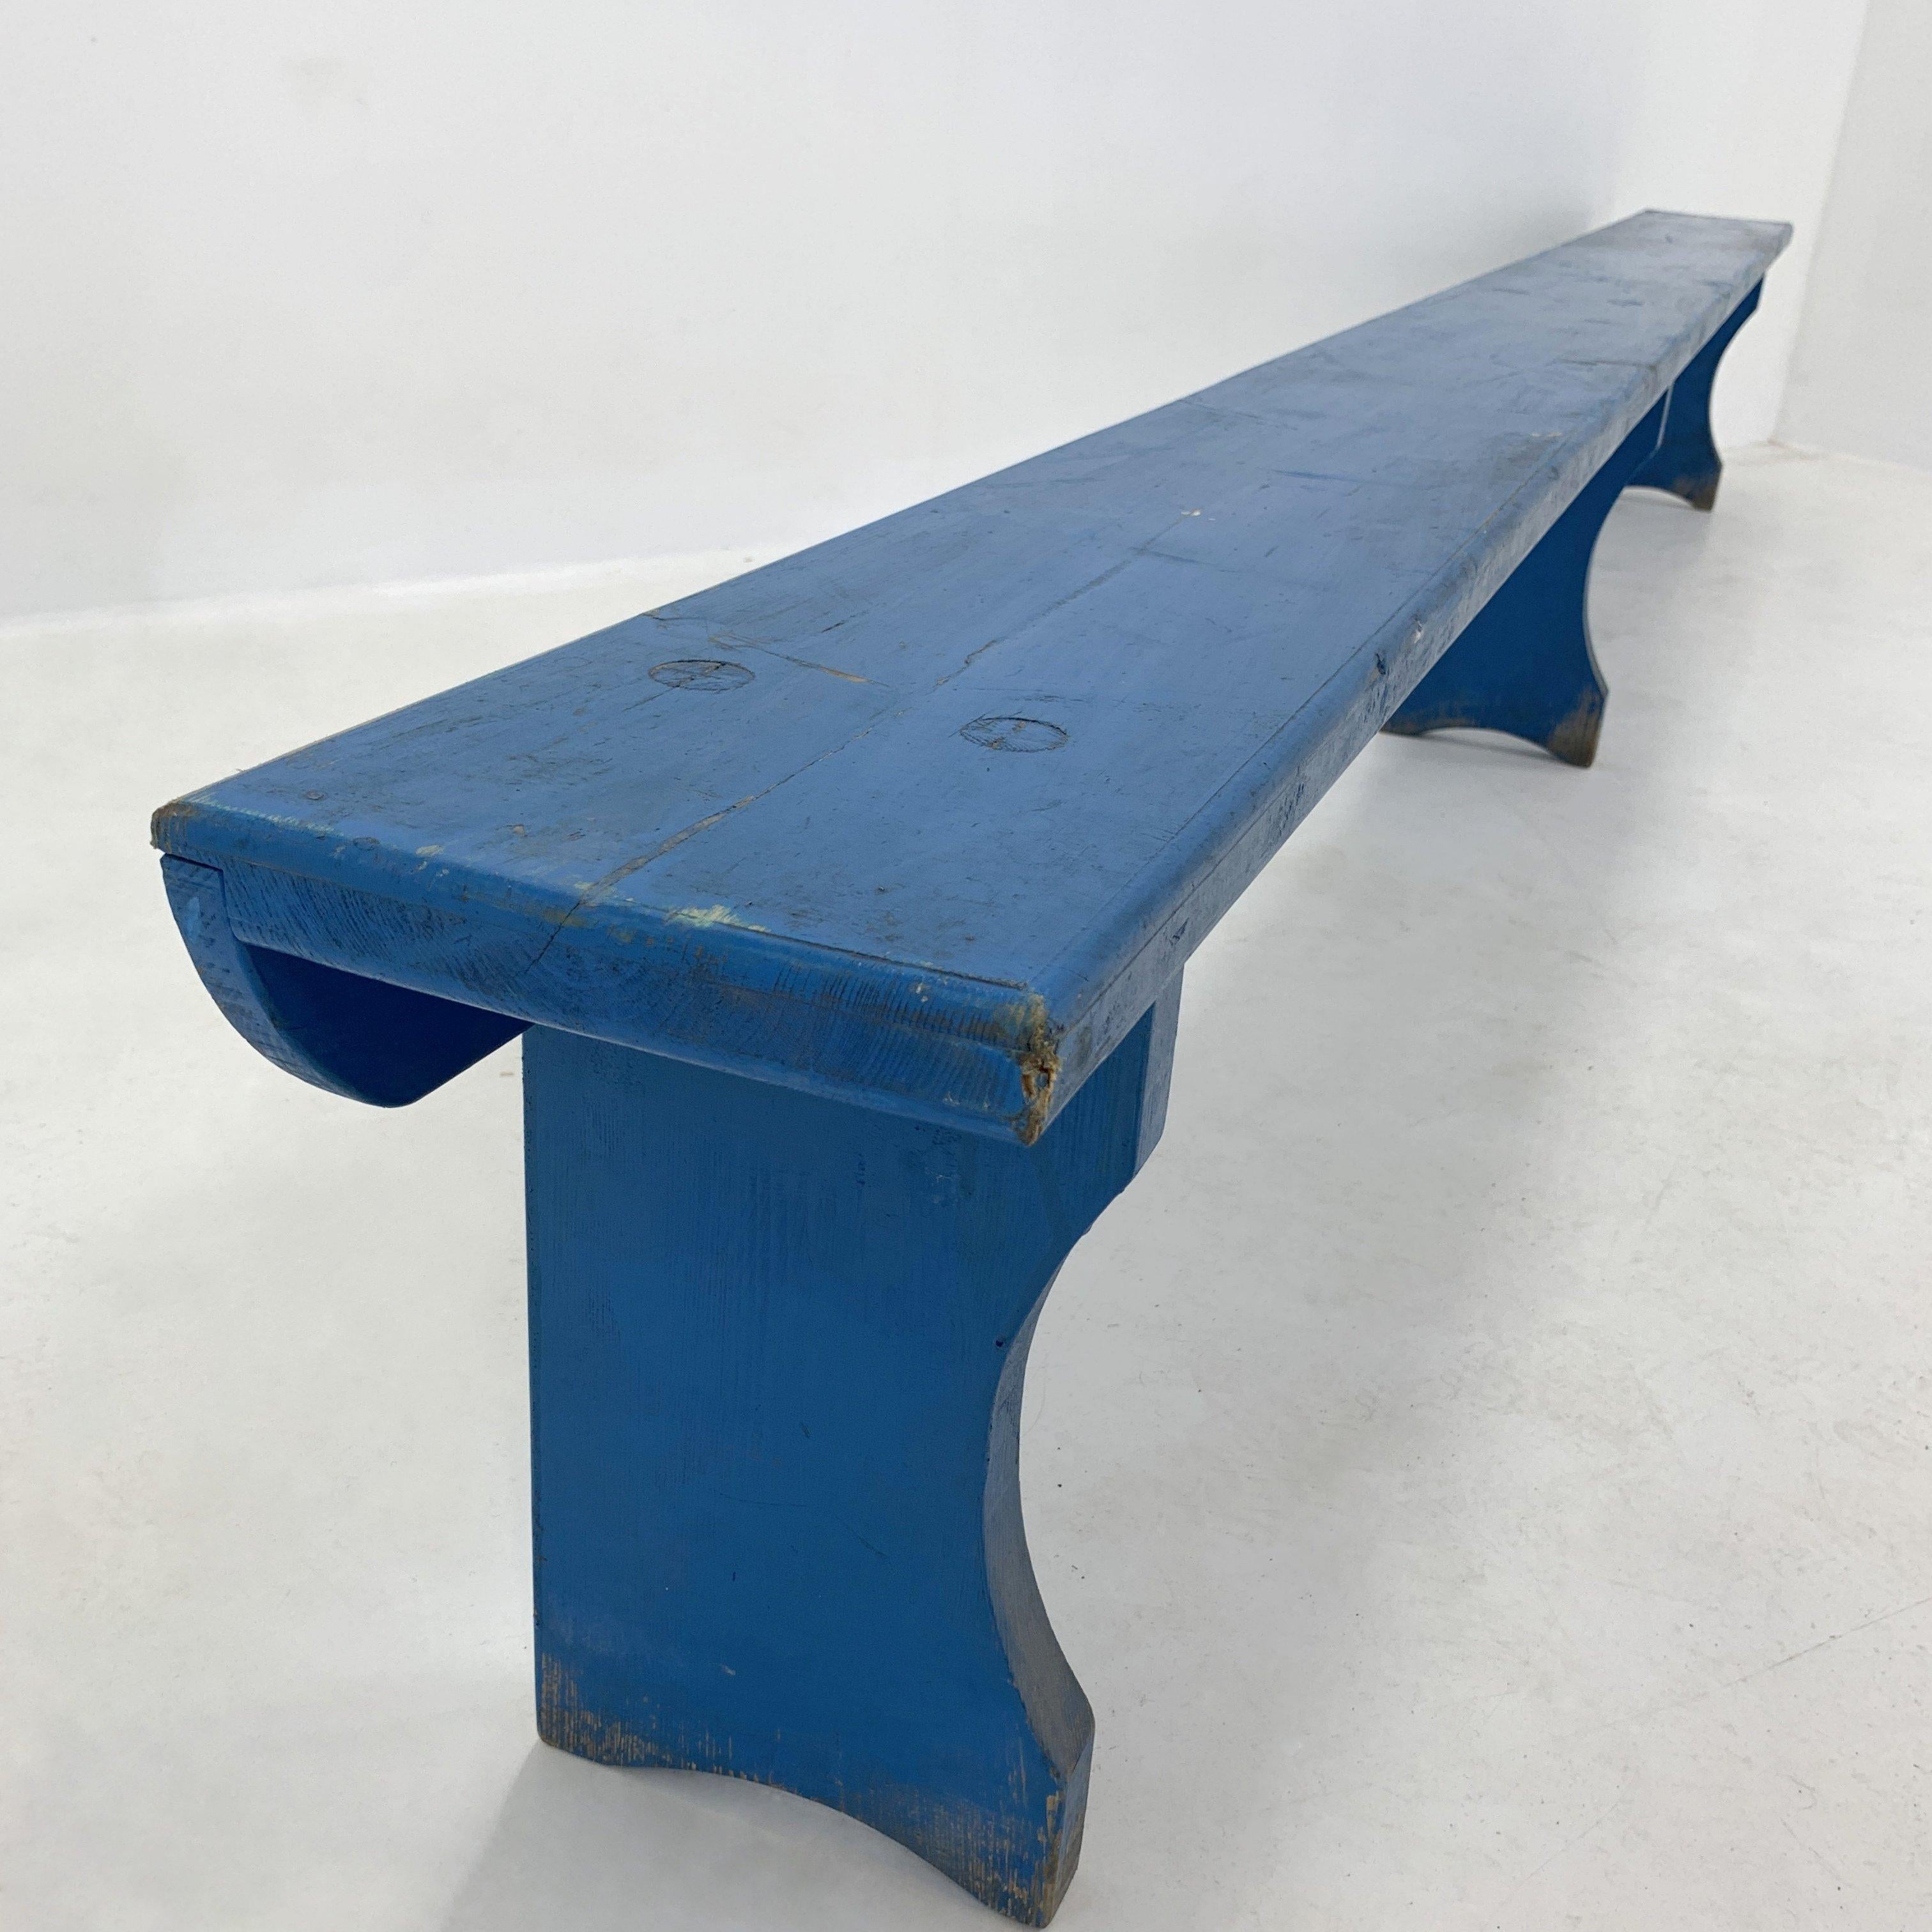 Long vintage all-wood bench from an elementary school in former Czechoslovakia from 1930s with its original paint.